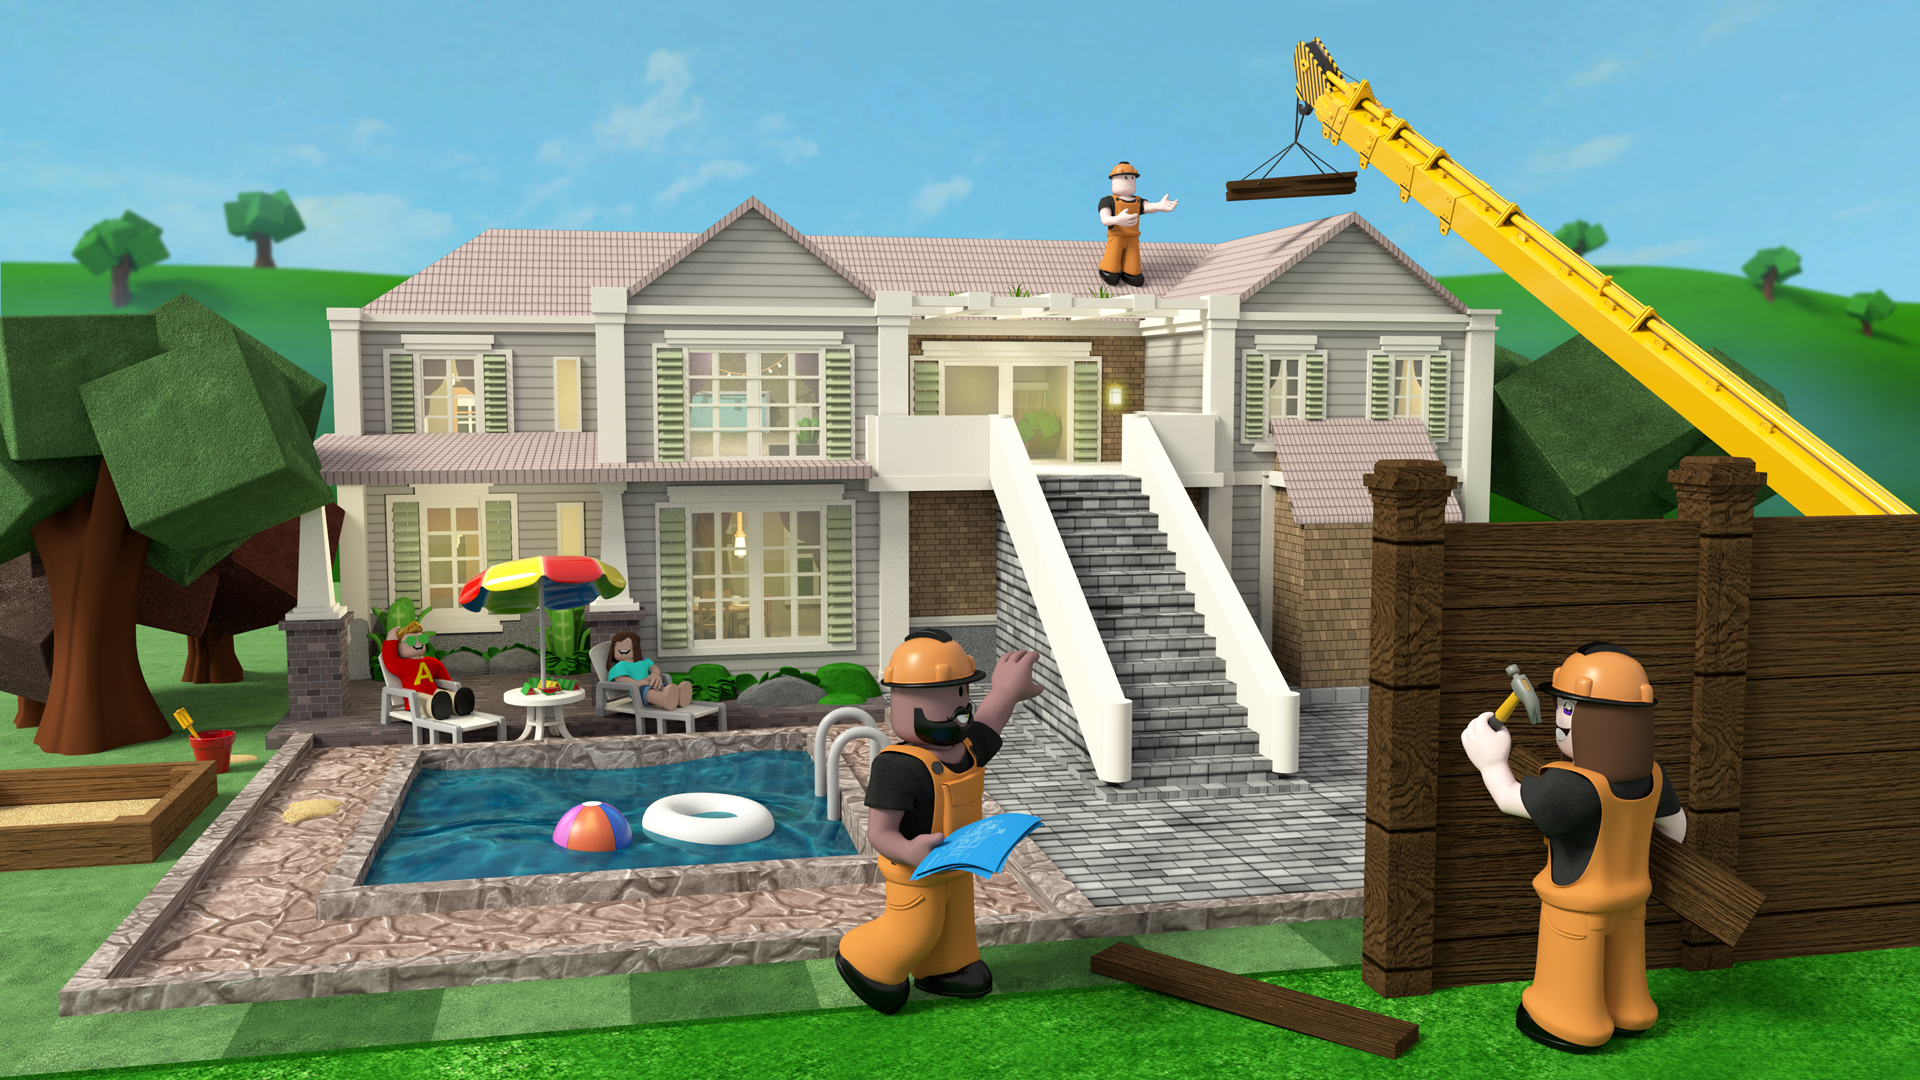 An Inside Look At Roblox The Gaming Universe That S Exploded To 164 000 000 Users By Spero Ventures Spero Ventures Sep 2020 Medium - team create roblox studio 2019